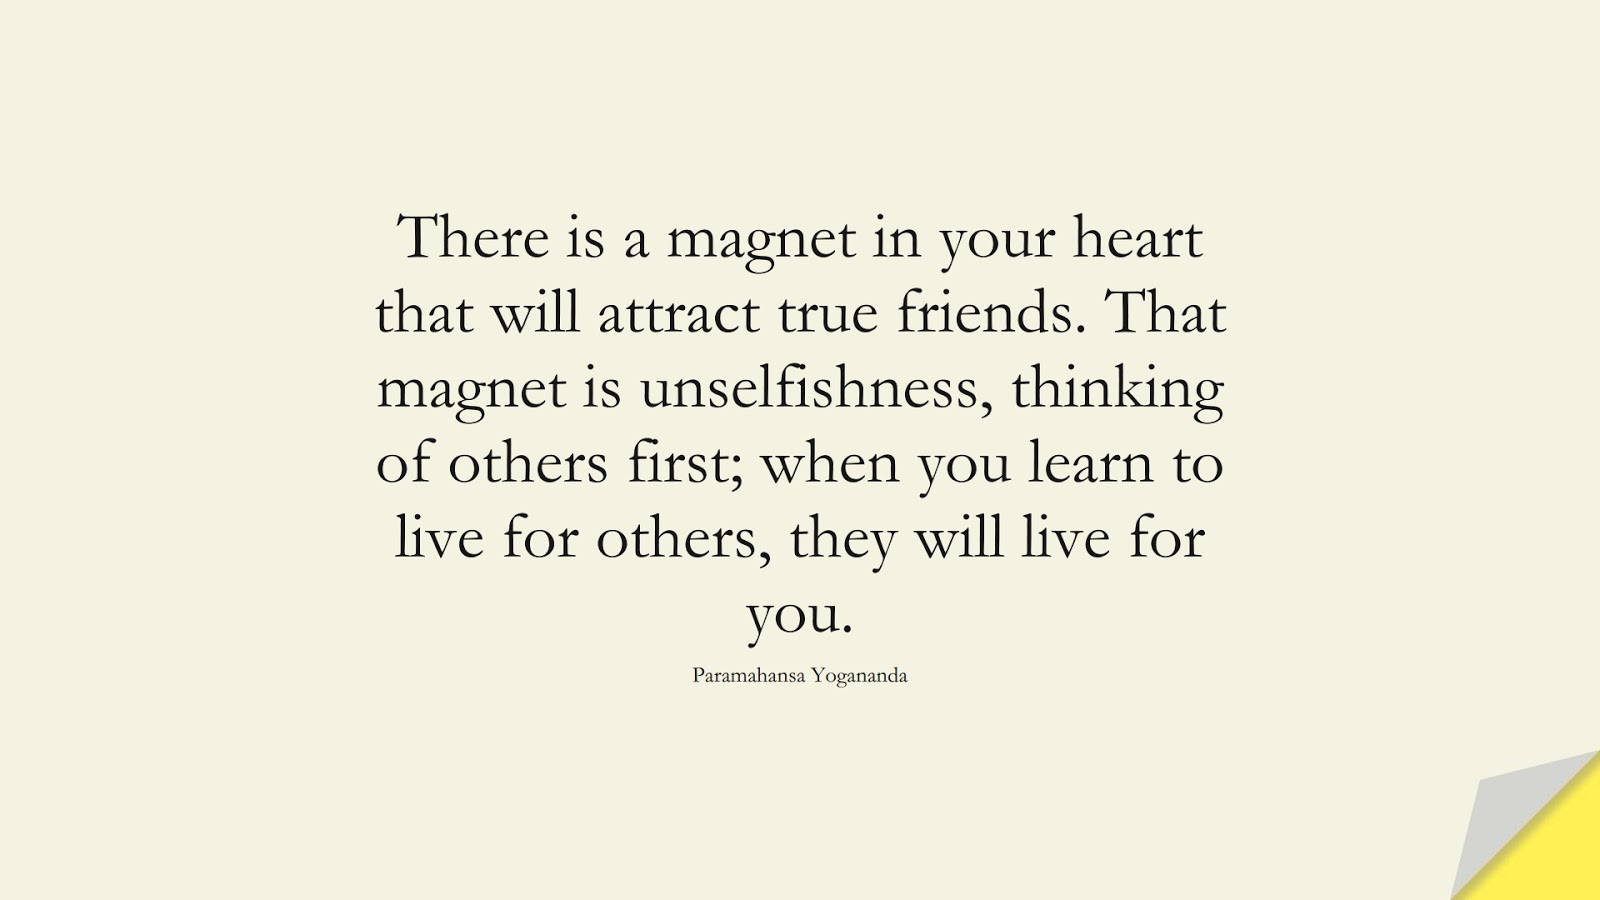 There is a magnet in your heart that will attract true friends. That magnet is unselfishness, thinking of others first; when you learn to live for others, they will live for you. (Paramahansa Yogananda);  #FriendshipQuotes